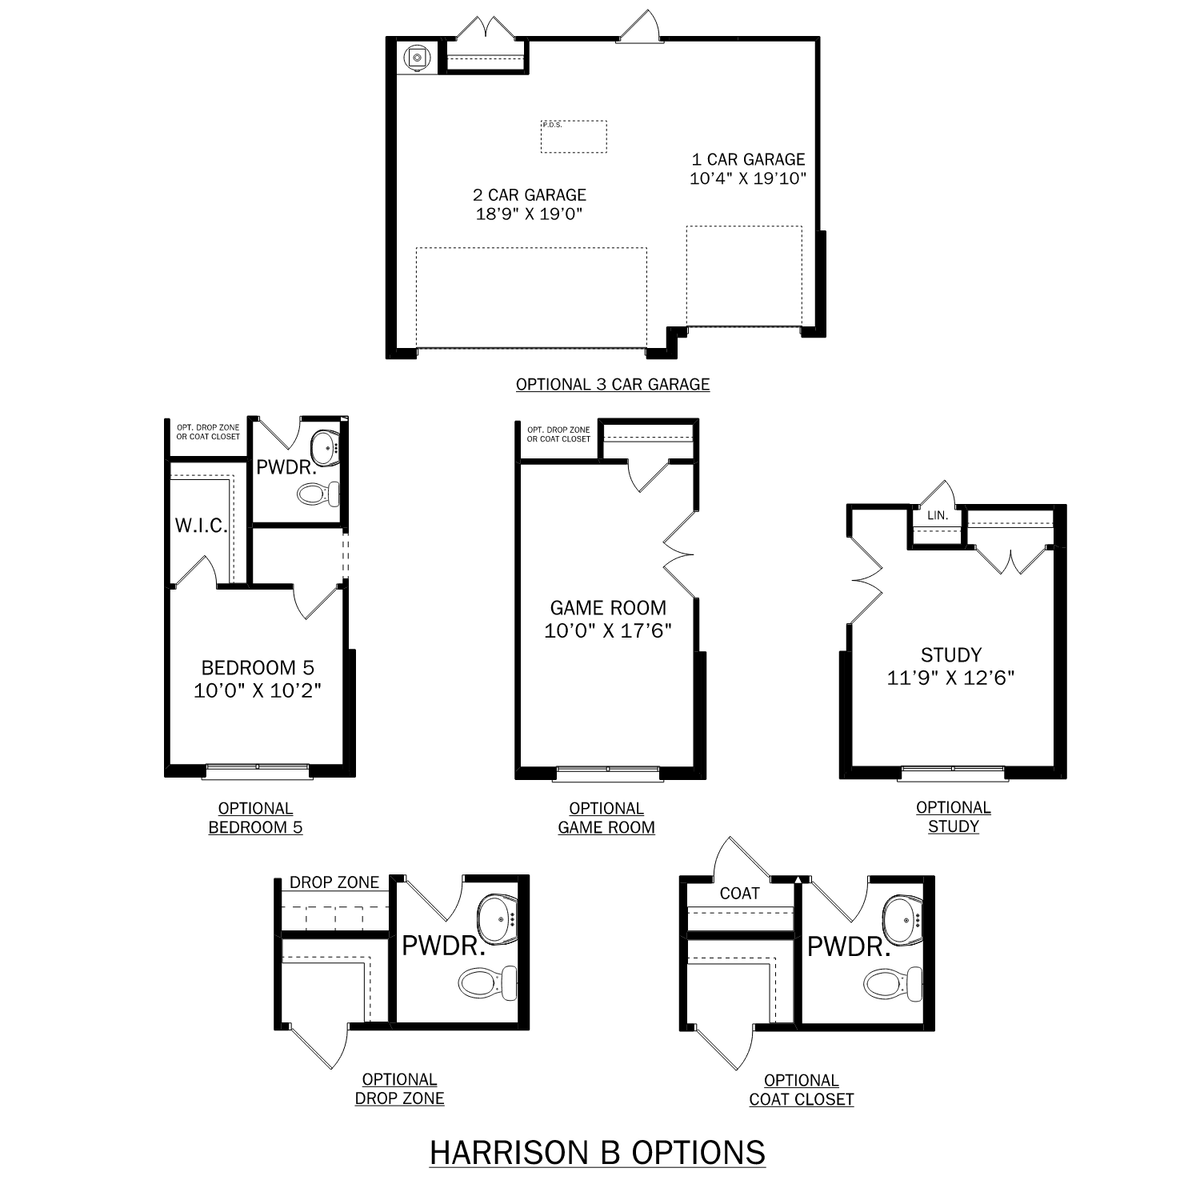 2 - The Harrison B buildable floor plan layout in Davidson Homes' Pikes Ridge community.